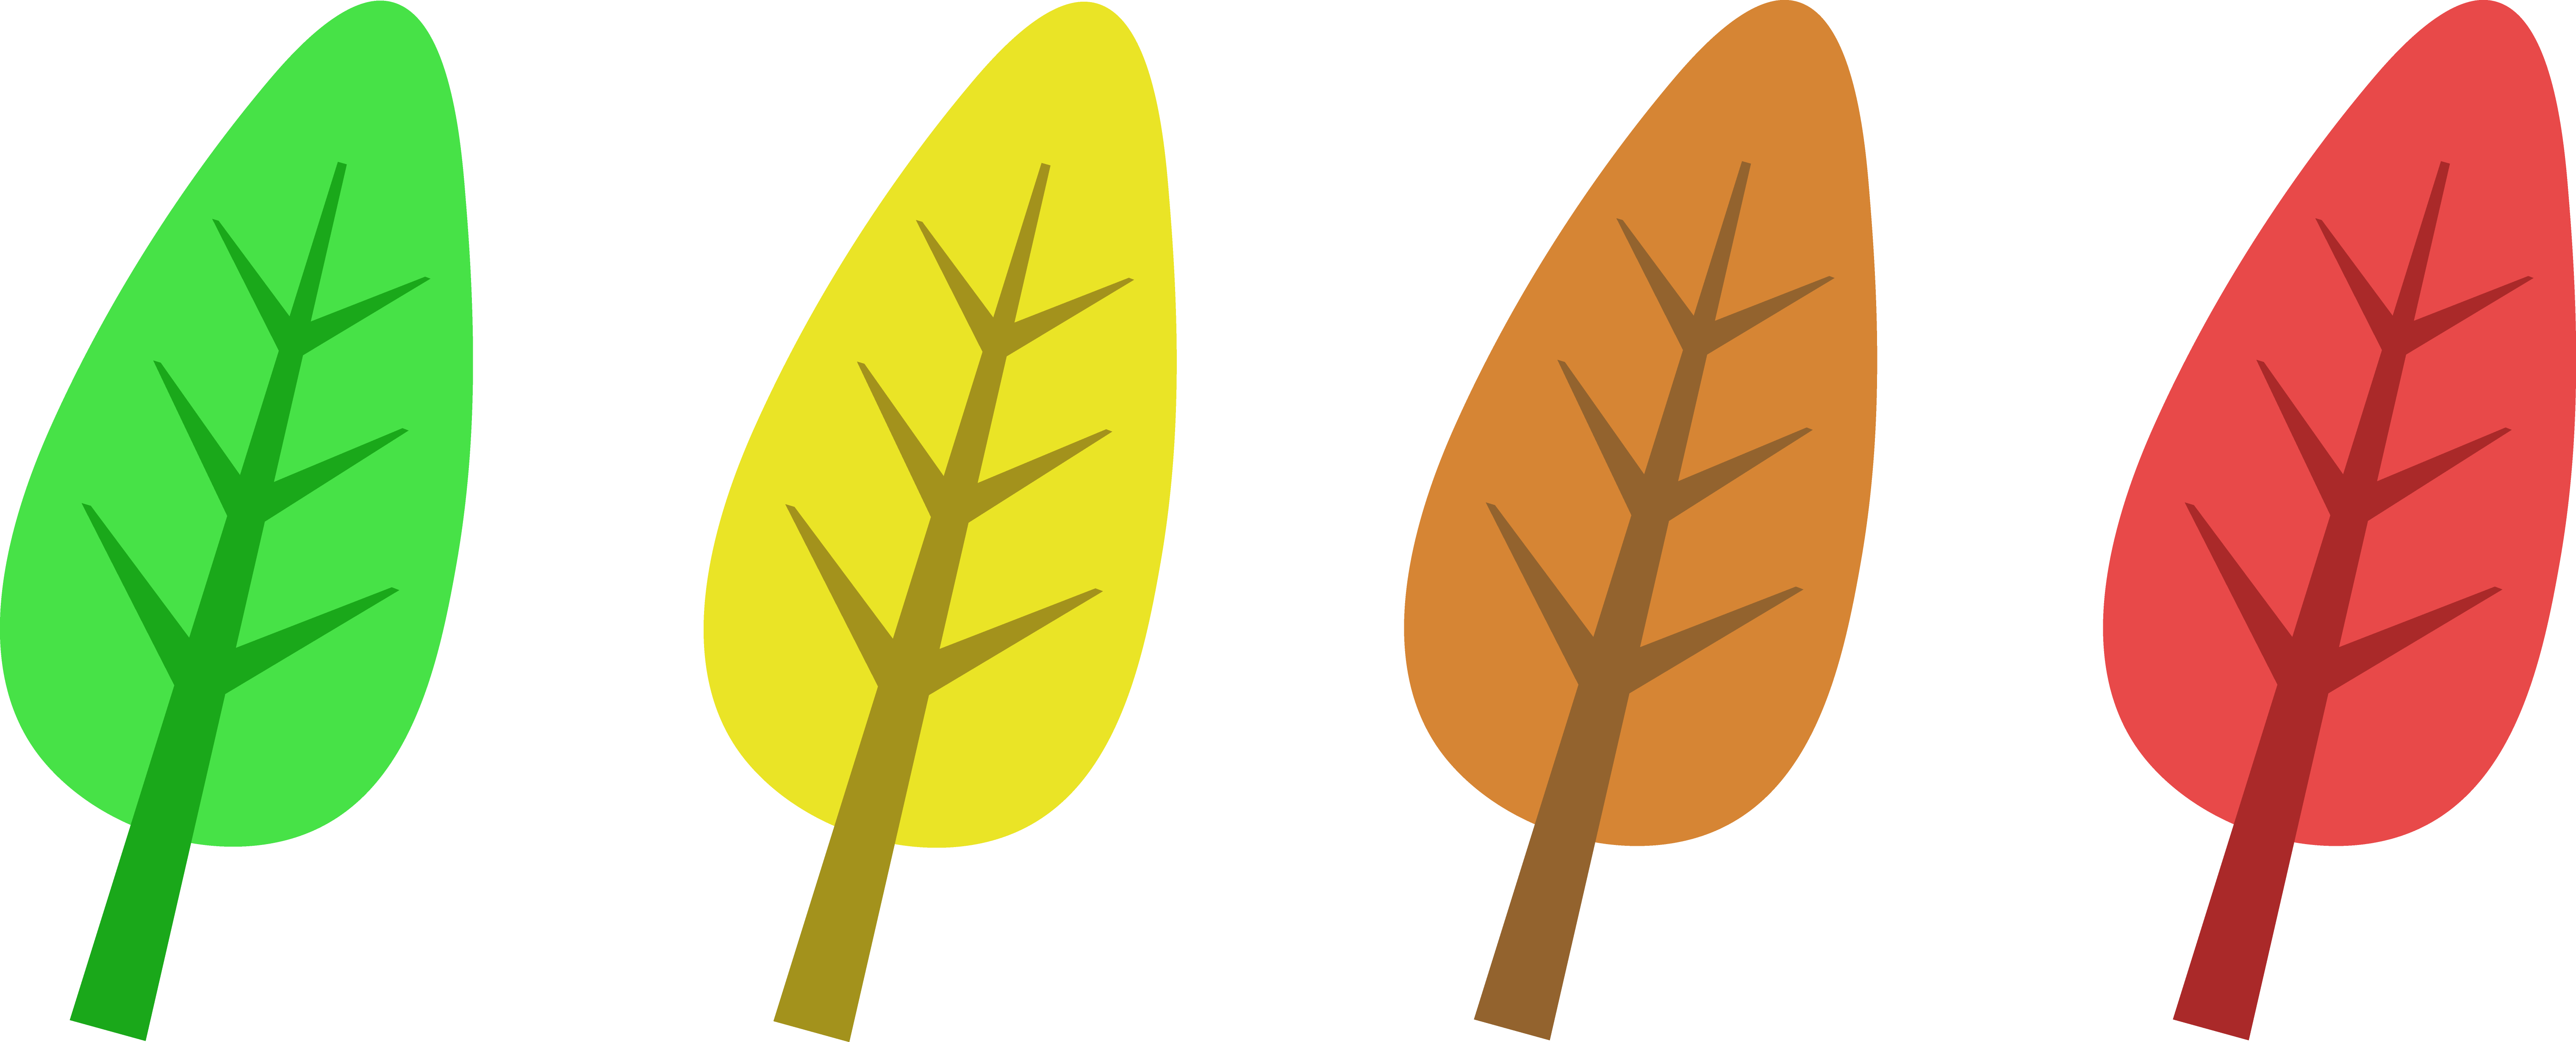 Colored Autumn Tree Leaves - Free Clip Art